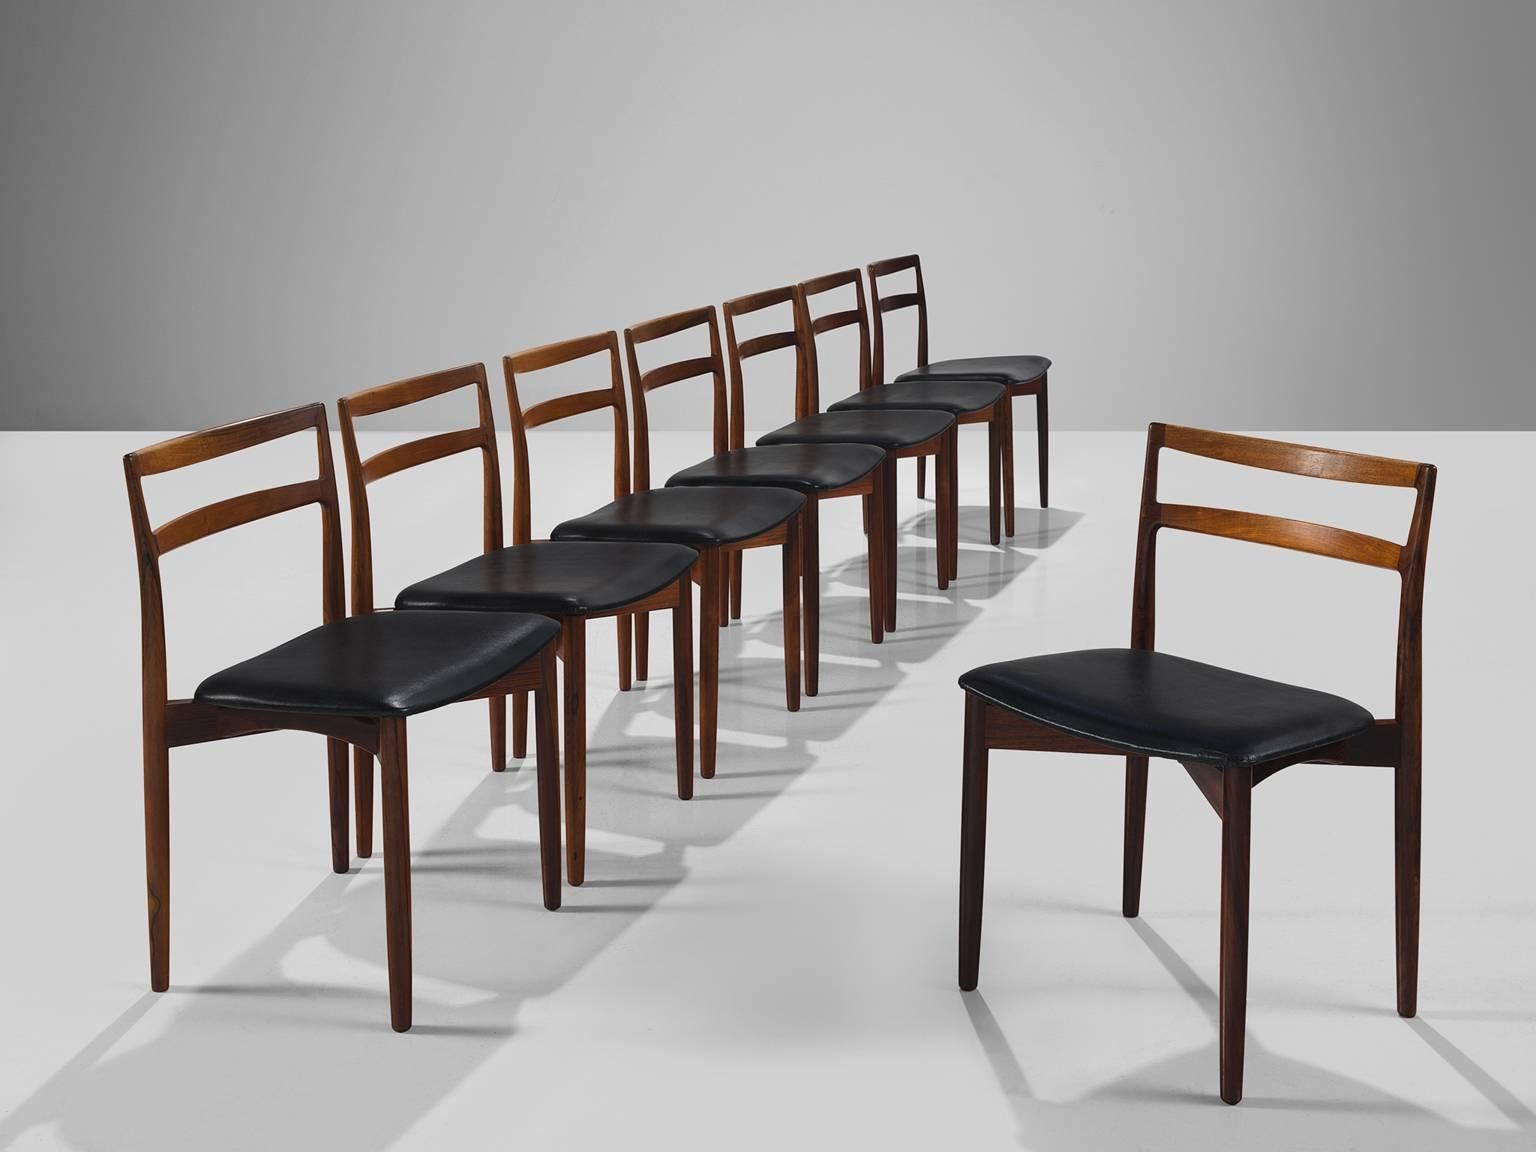 Harry Østergaard for Randers Møbelfabrik, set of eight rosewood chairs with black leatherette model 61, Denmark, 1960s.

Set of eight dining chairs in rosewood with black faux leather upholstery. The basic and linear character of the wooden frame